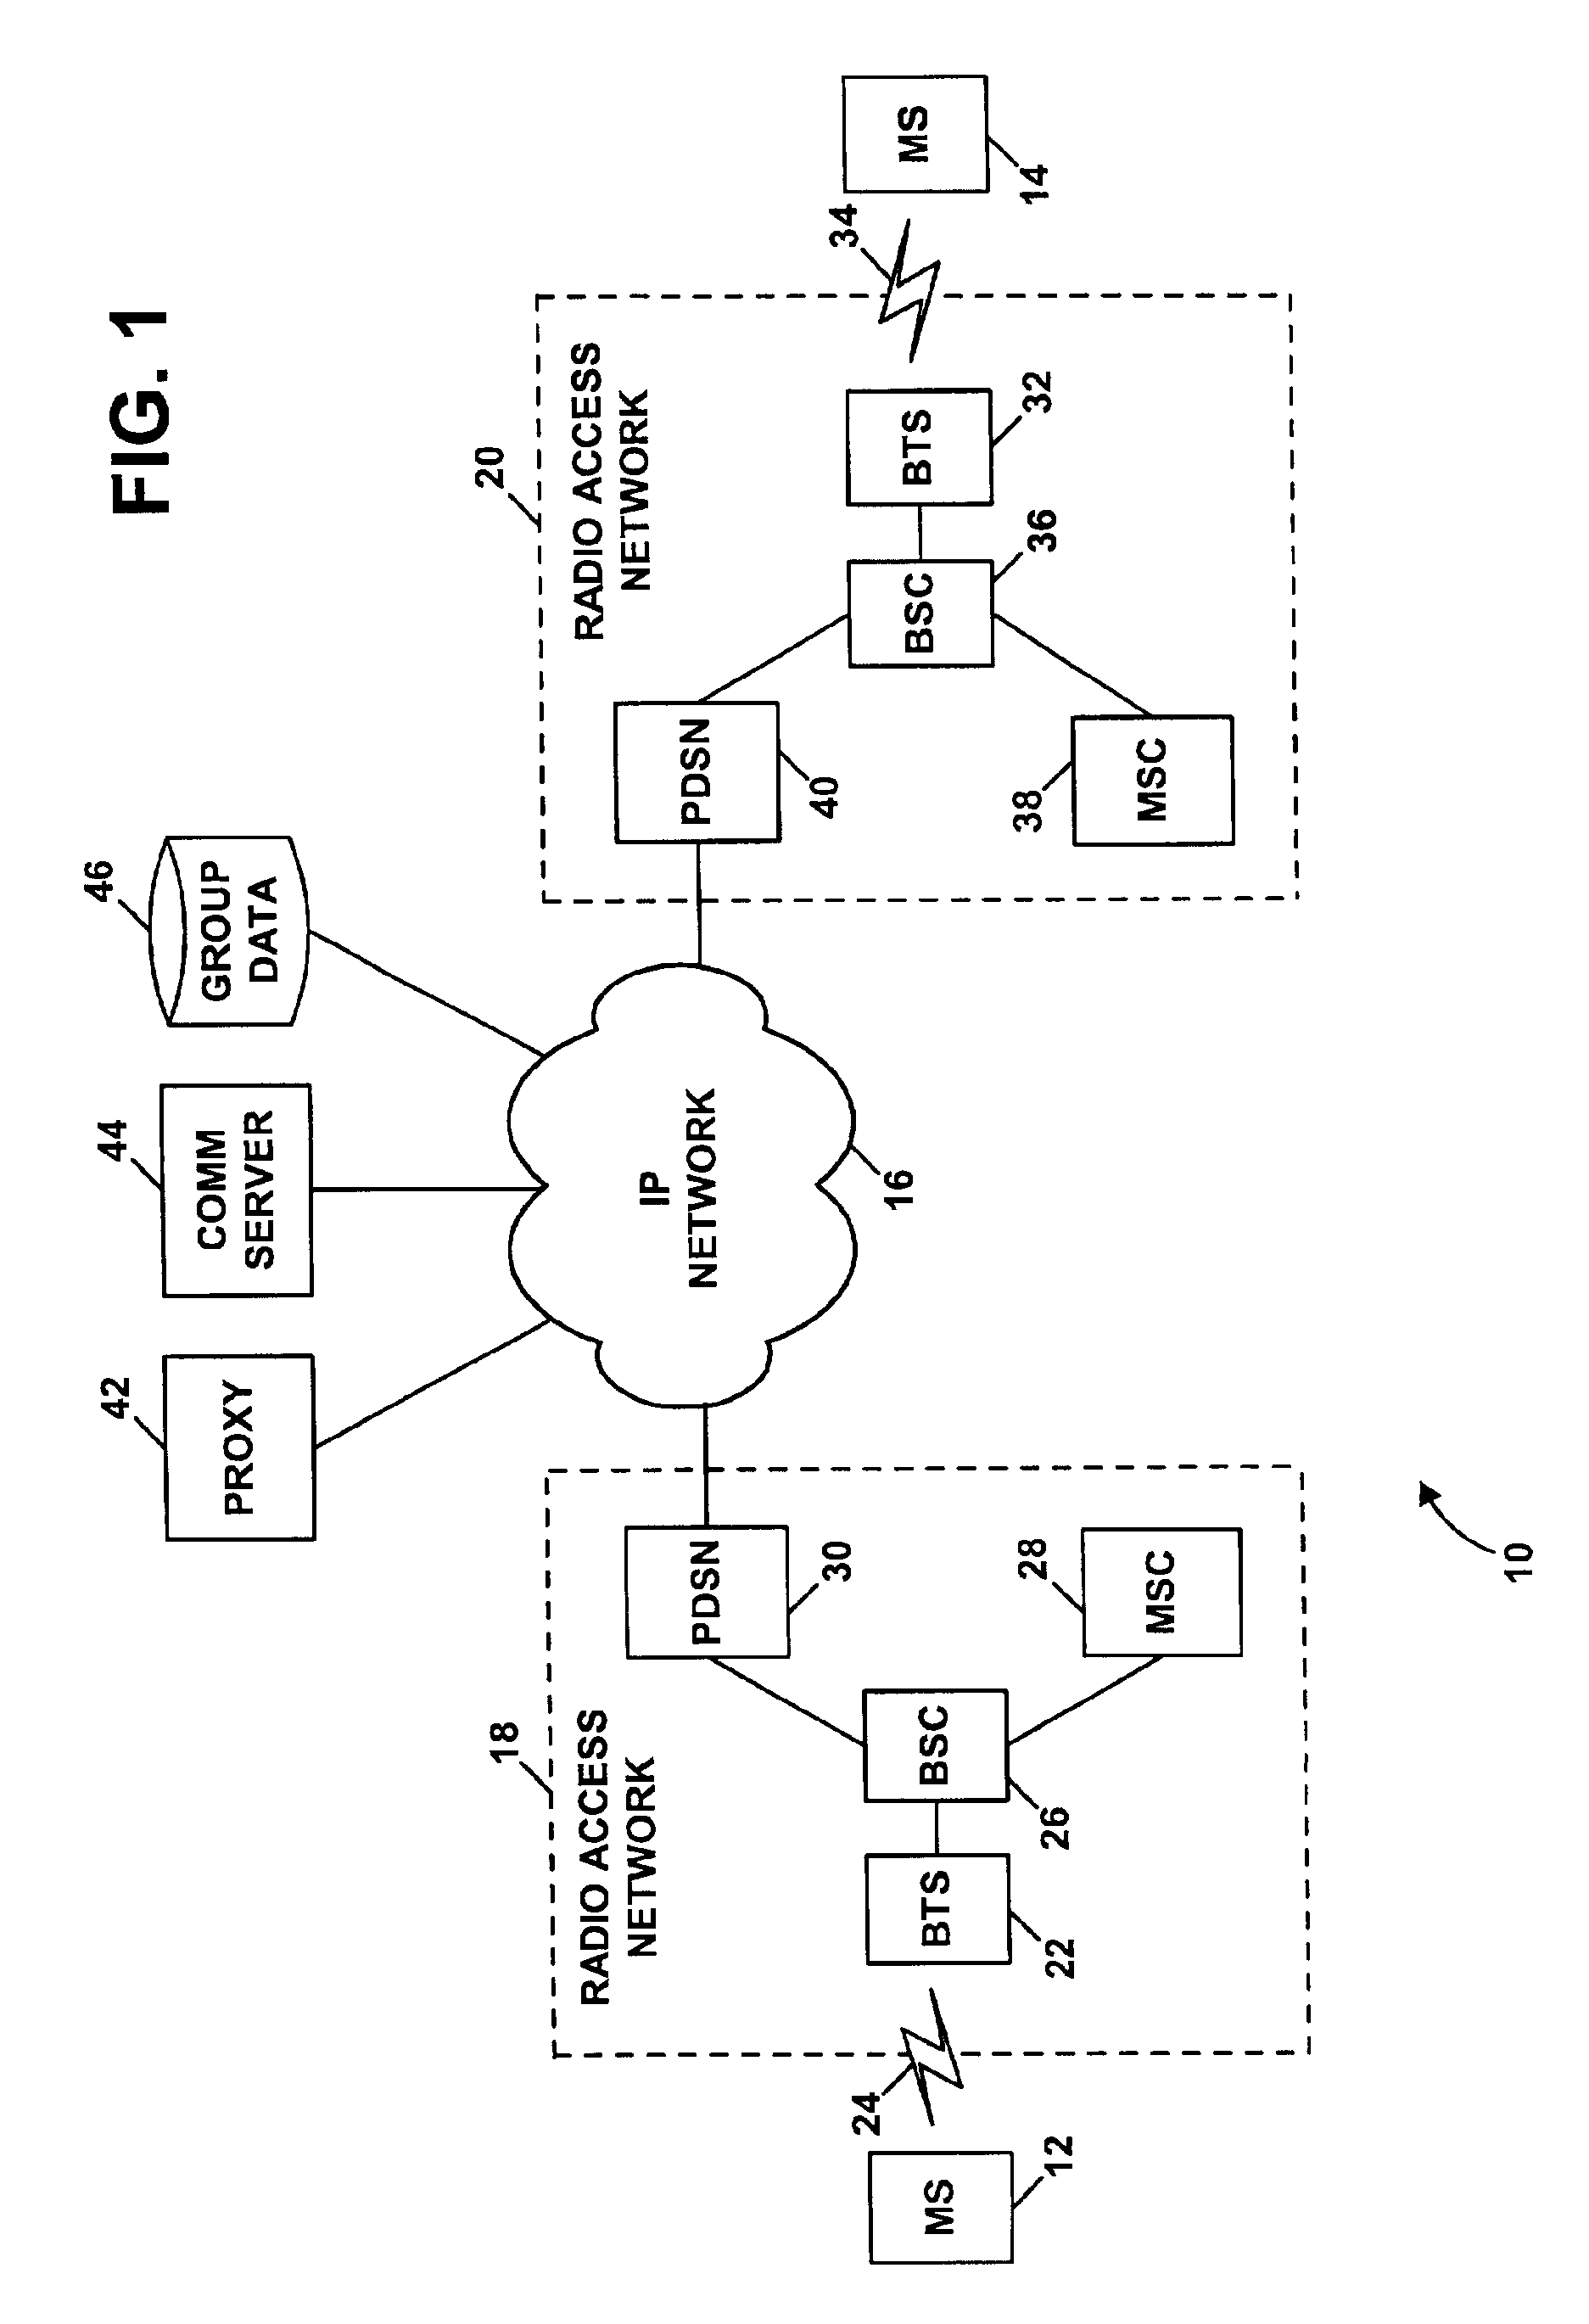 Method and system for selectively reducing call-setup latency through management of paging frequency and buffering of user speech in a wireless mobile station